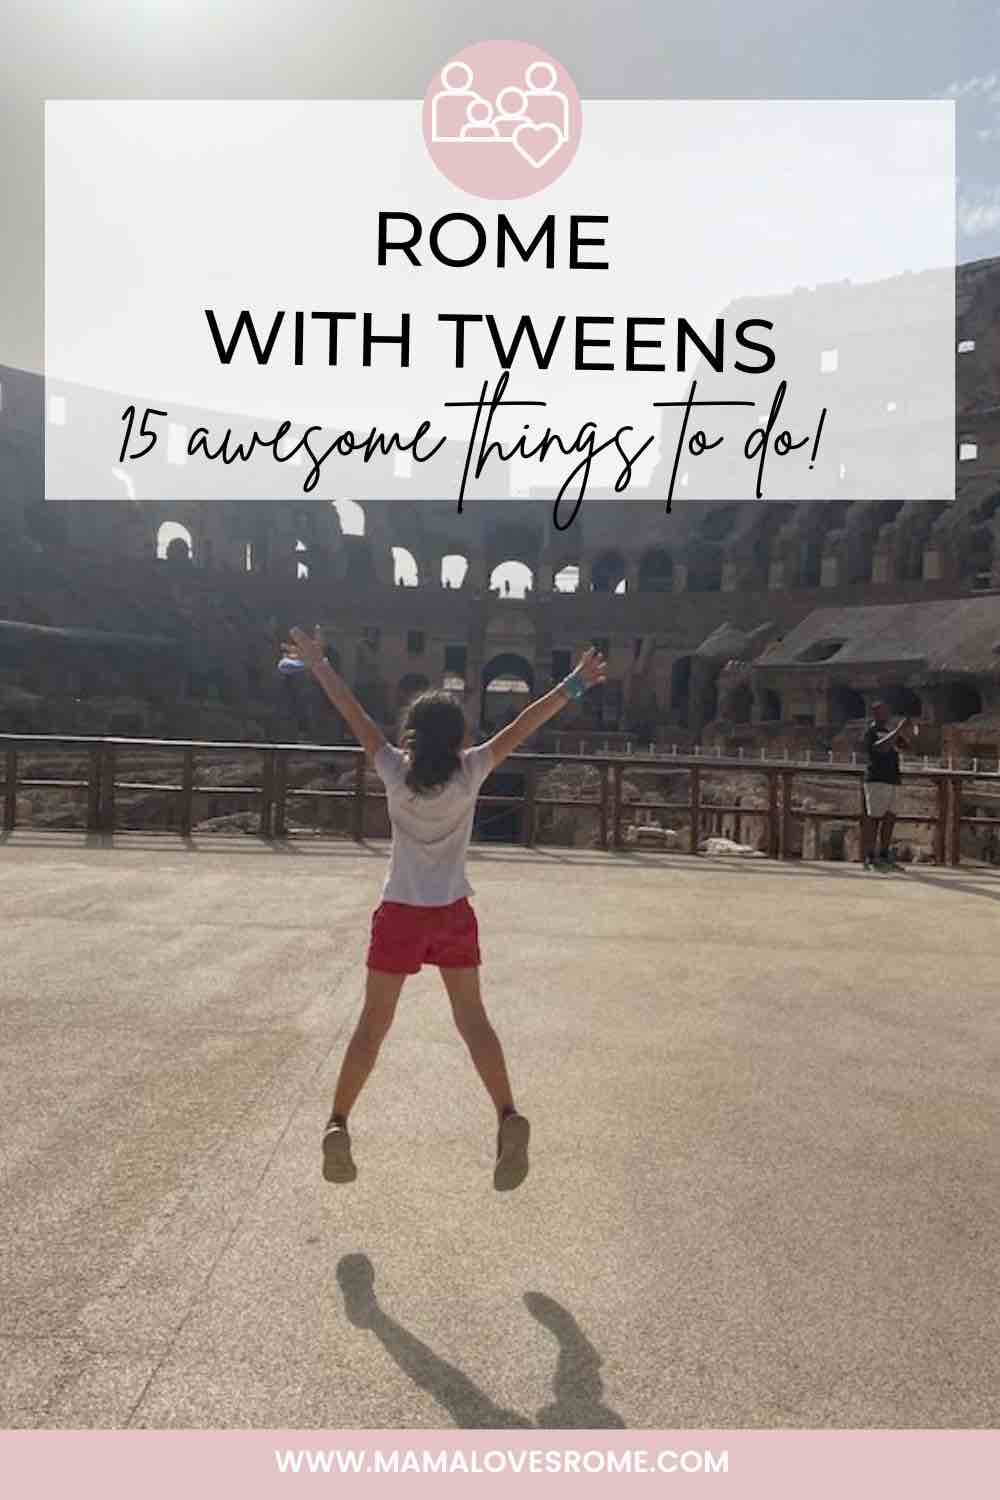 Image of tween girl jumping in the Rome Colosseum with overlay text: Rome with tweens, 15 awesome things to do 